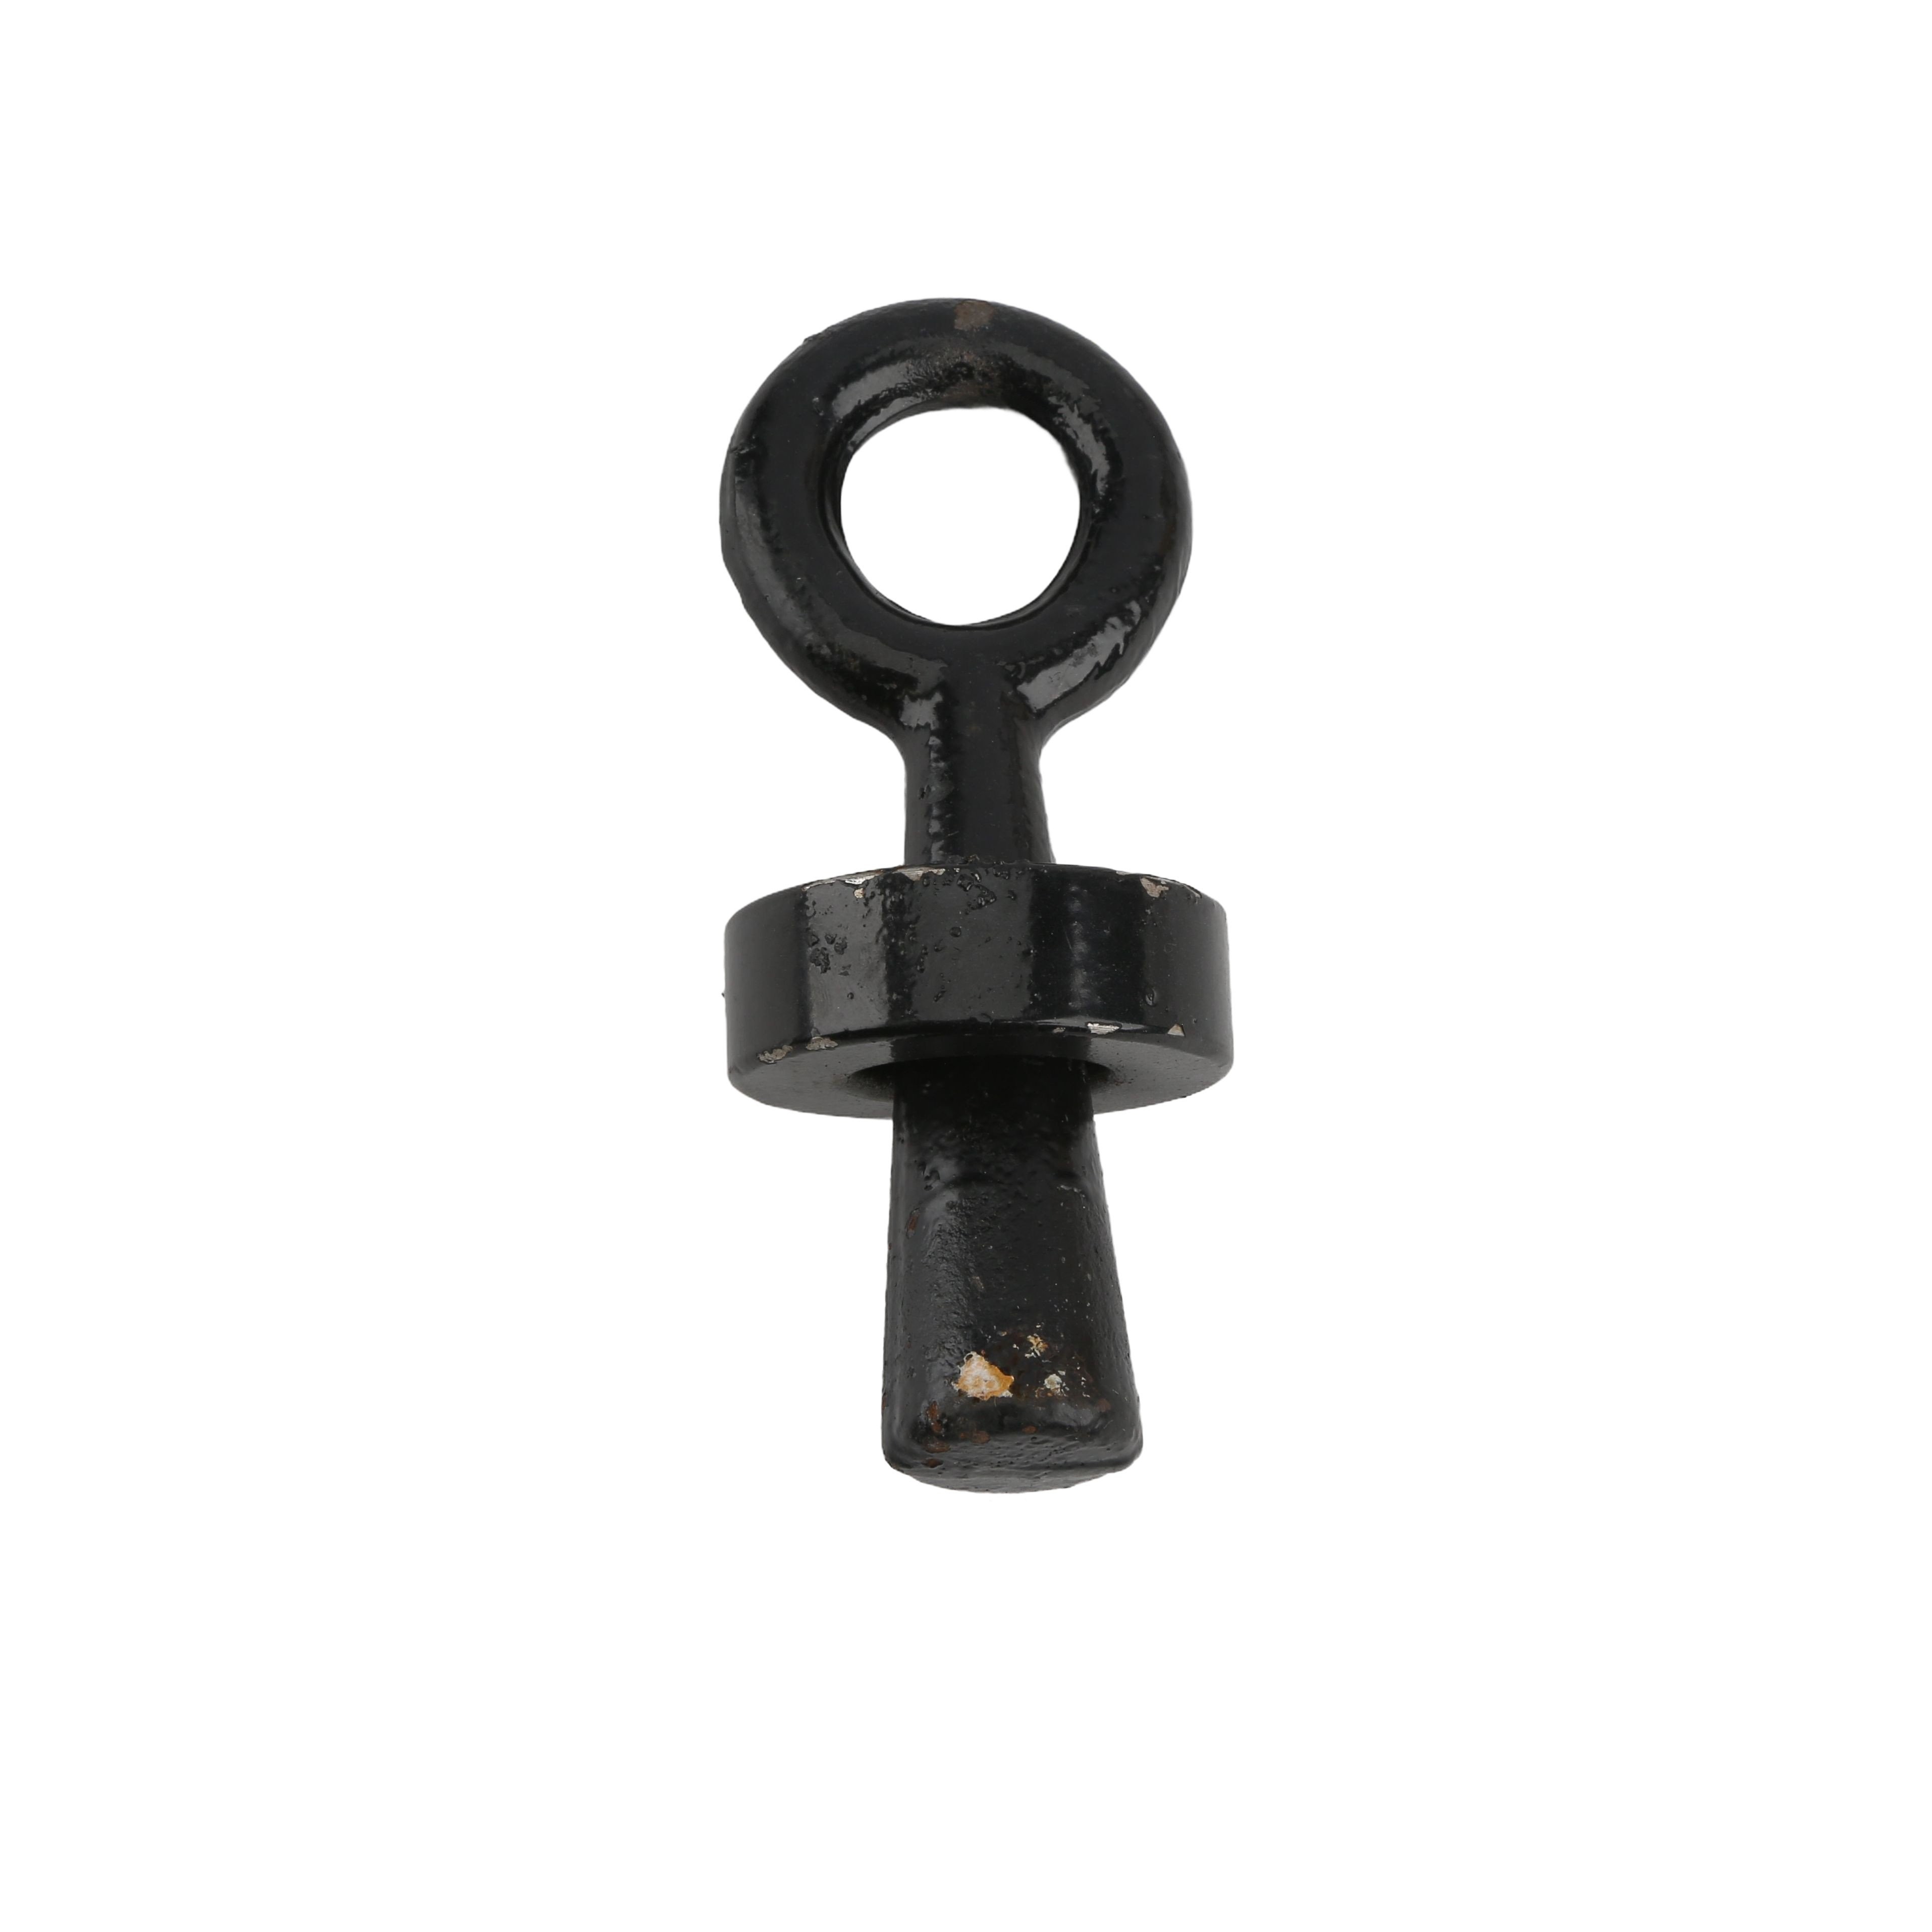 https://chainlinkfittings.com/store/media/catalog/product/cache/1/image/9df78eab33525d08d6e5fb8d27136e95/h/d/hdwg_heavy-duty-wire-gripper-for-barbed-wire-smooth-wire-and-small-cable---wire-and-cable-gripping-pull-along-tool_1.jpg